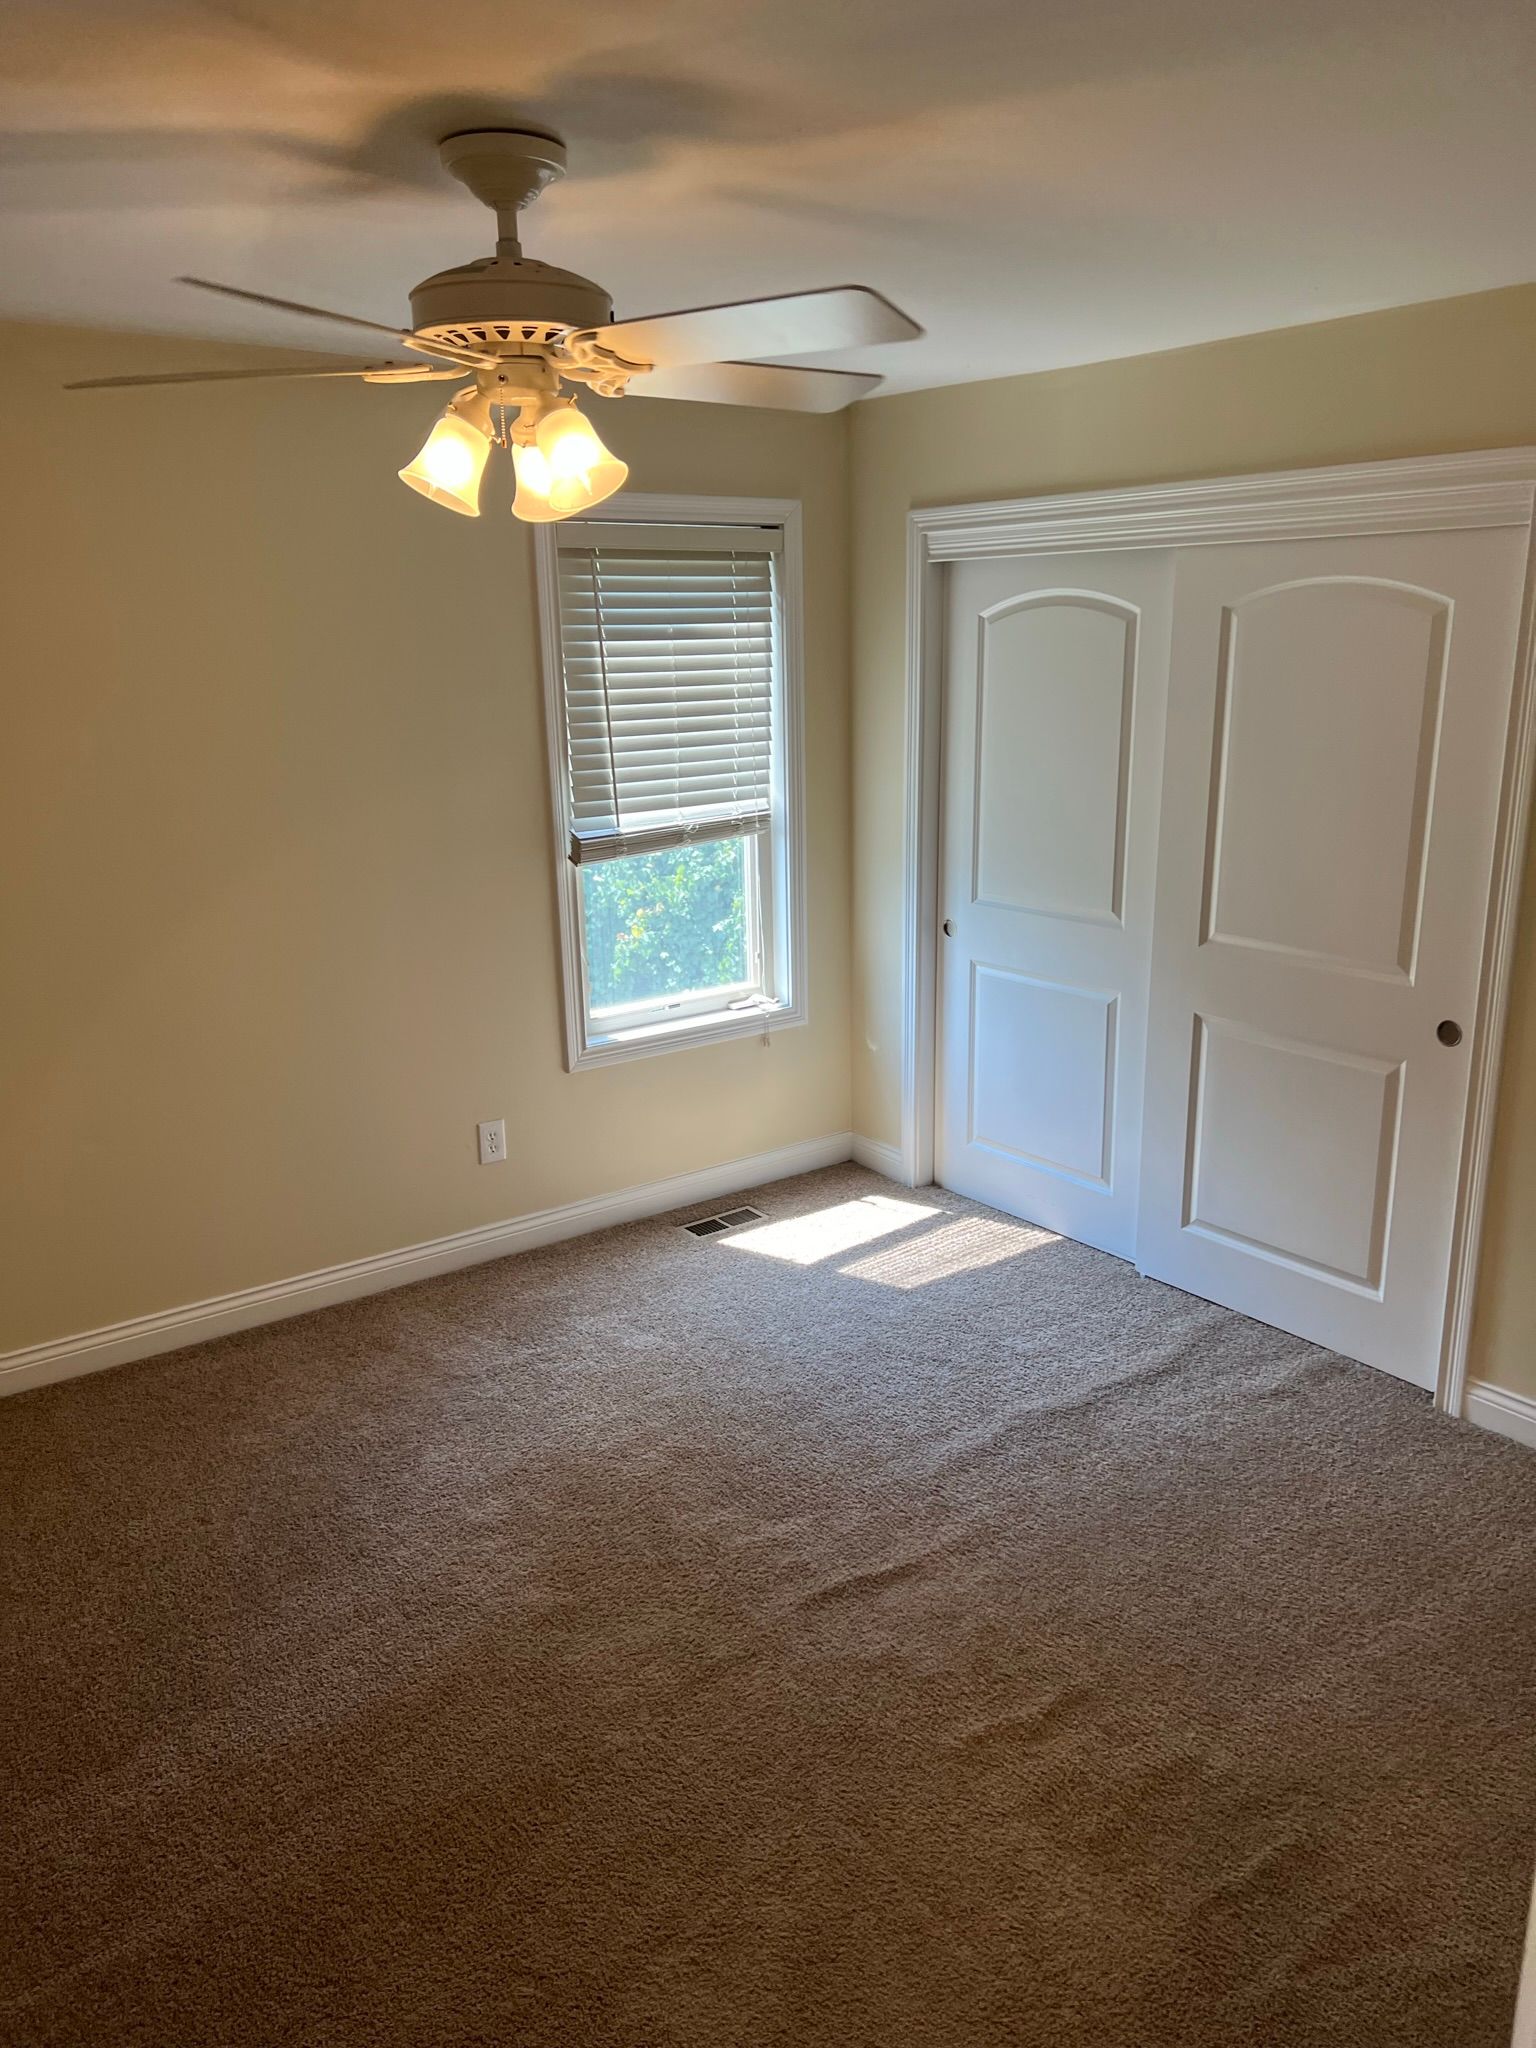 Crescent Avenue Townhomes - Bedroom with windows and celling fan